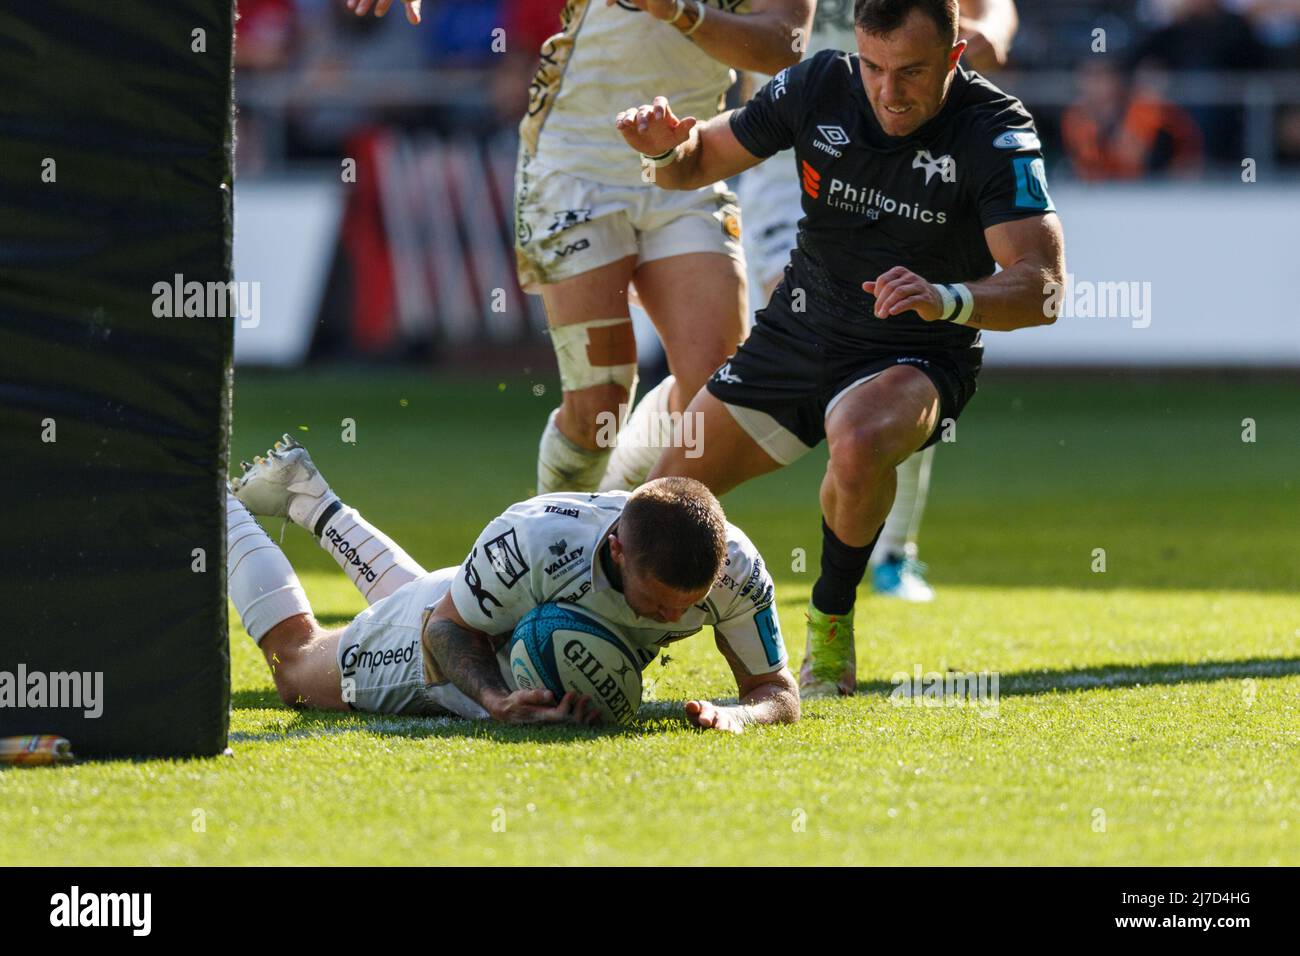 Swansea, UK. 8 May, 2022. Lewis Jones of Dragons scores a try during the Ospreys v Dragons United Rugby Championship Match. Credit: Gruffydd ThomasAlamy Stock Photo